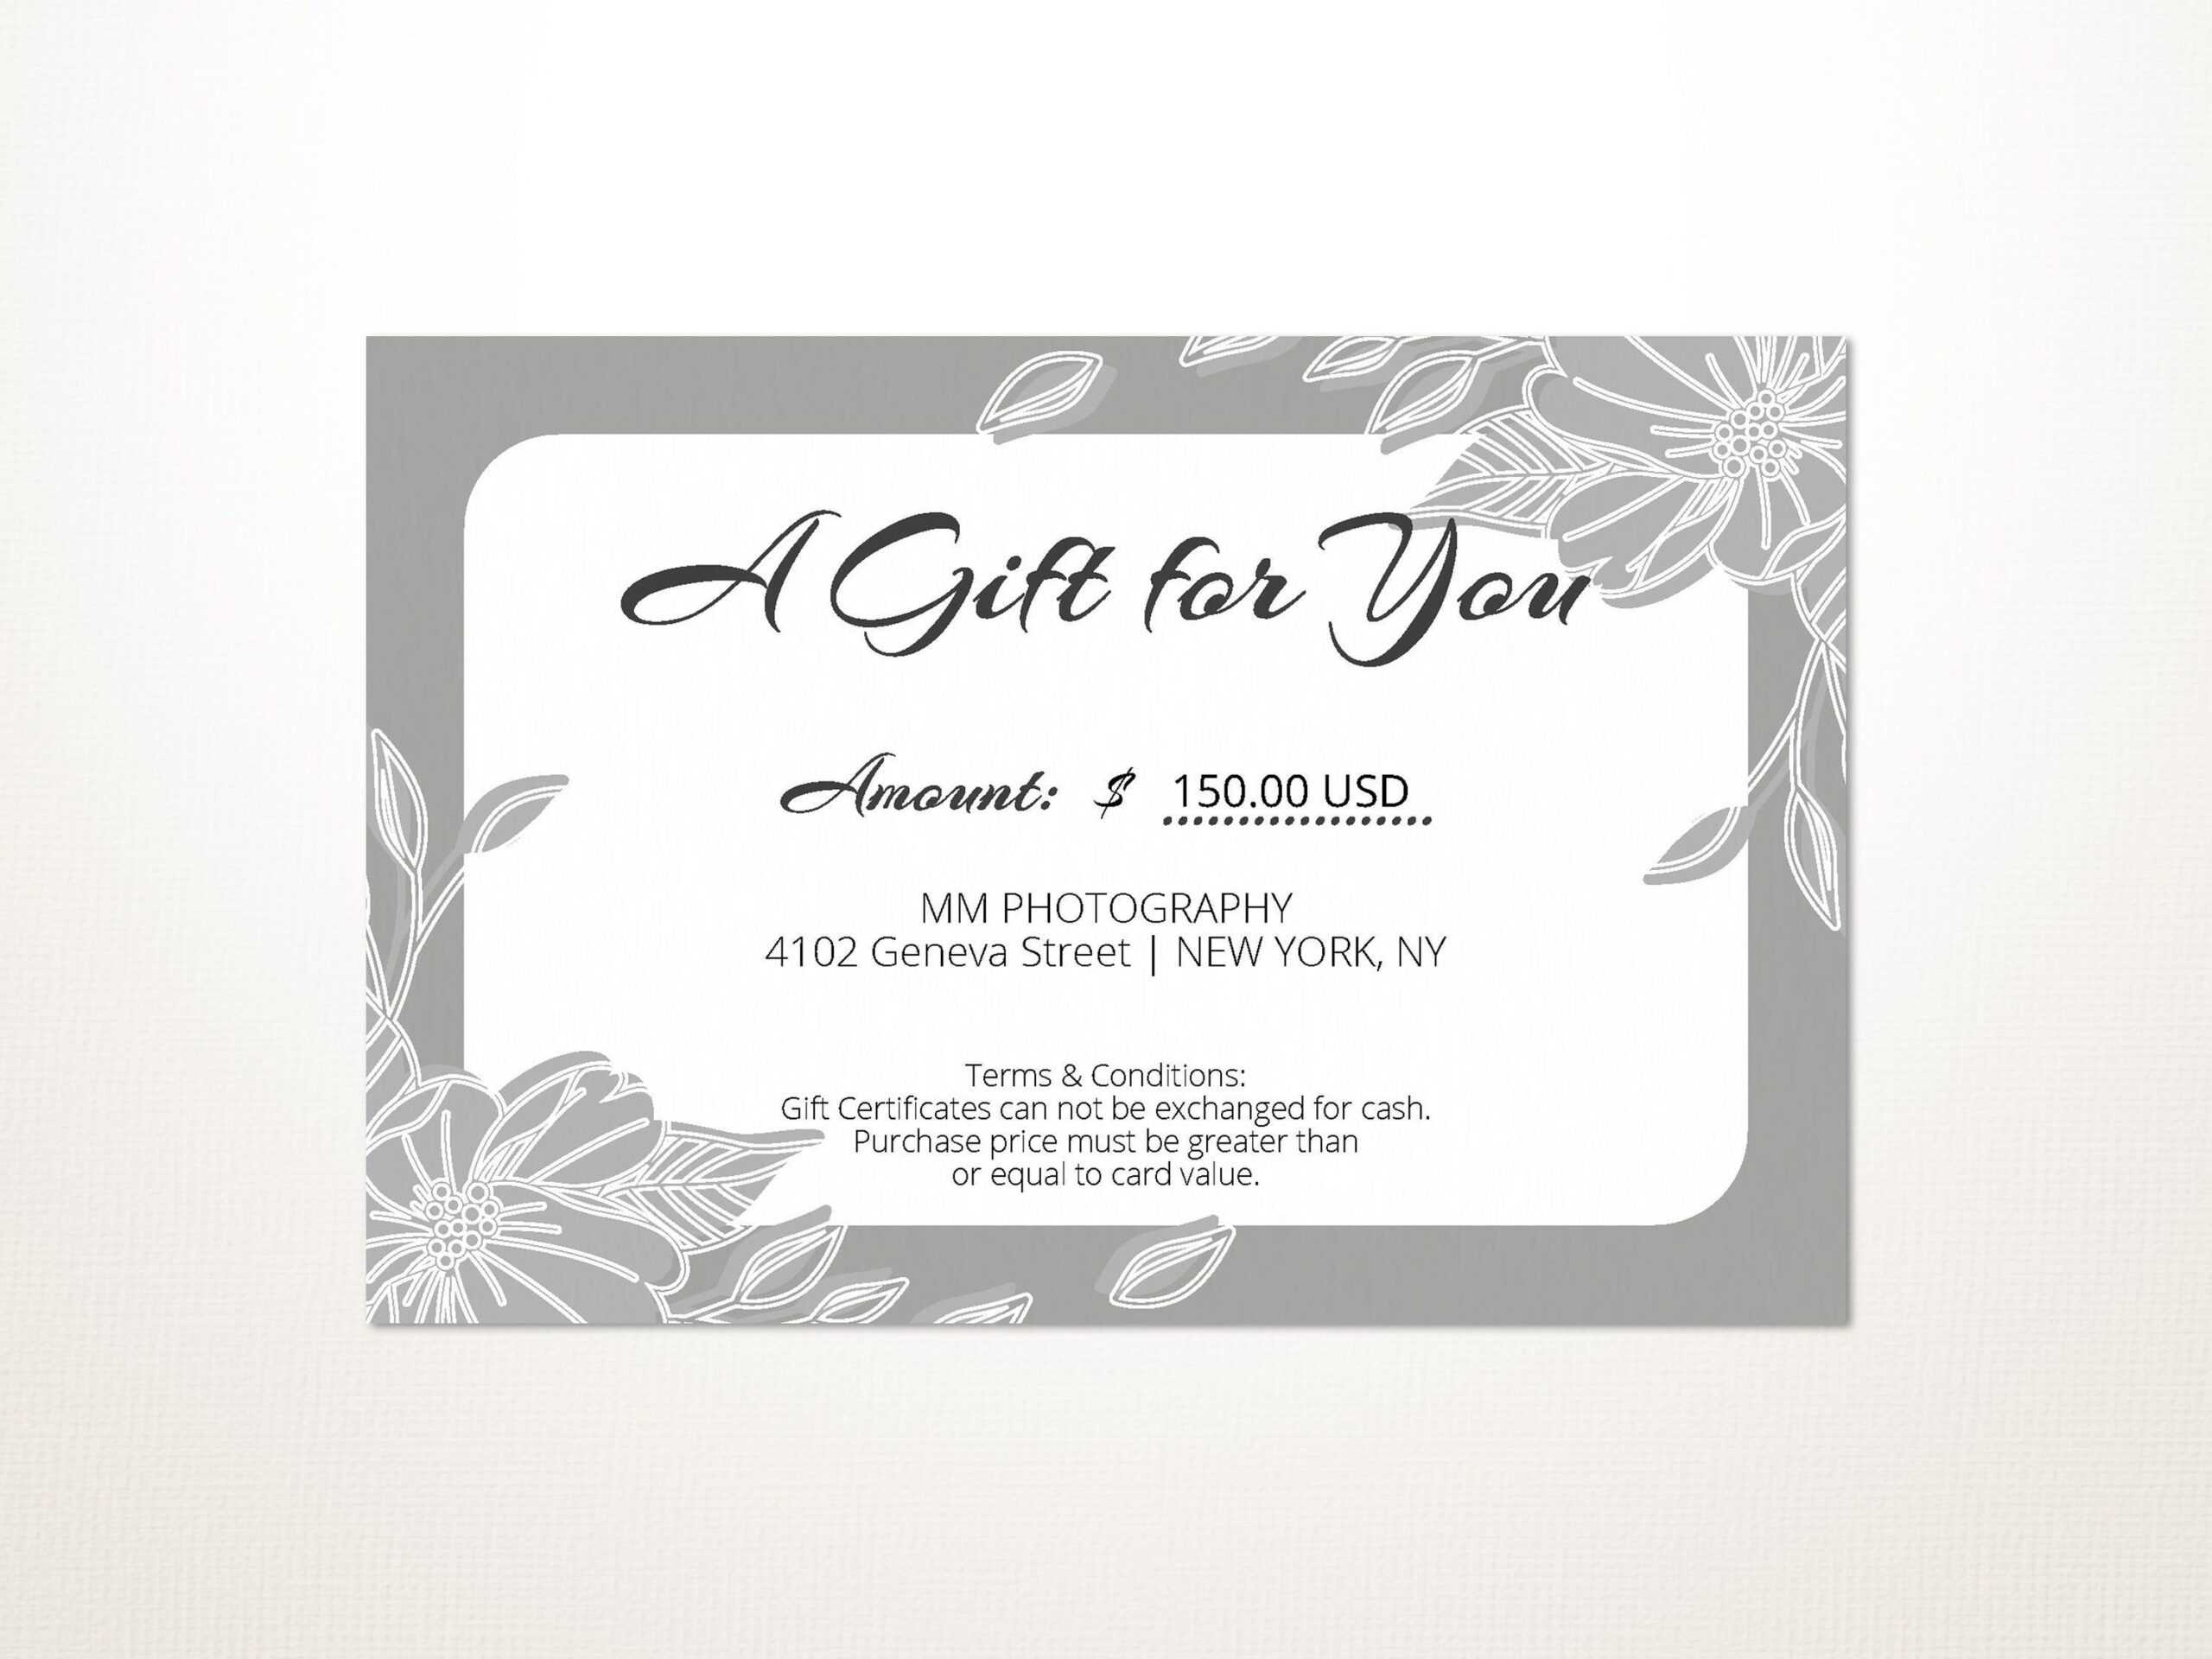 022 Wedding Gift Card Template Free Photographer Certificate In Referral Card Template Free